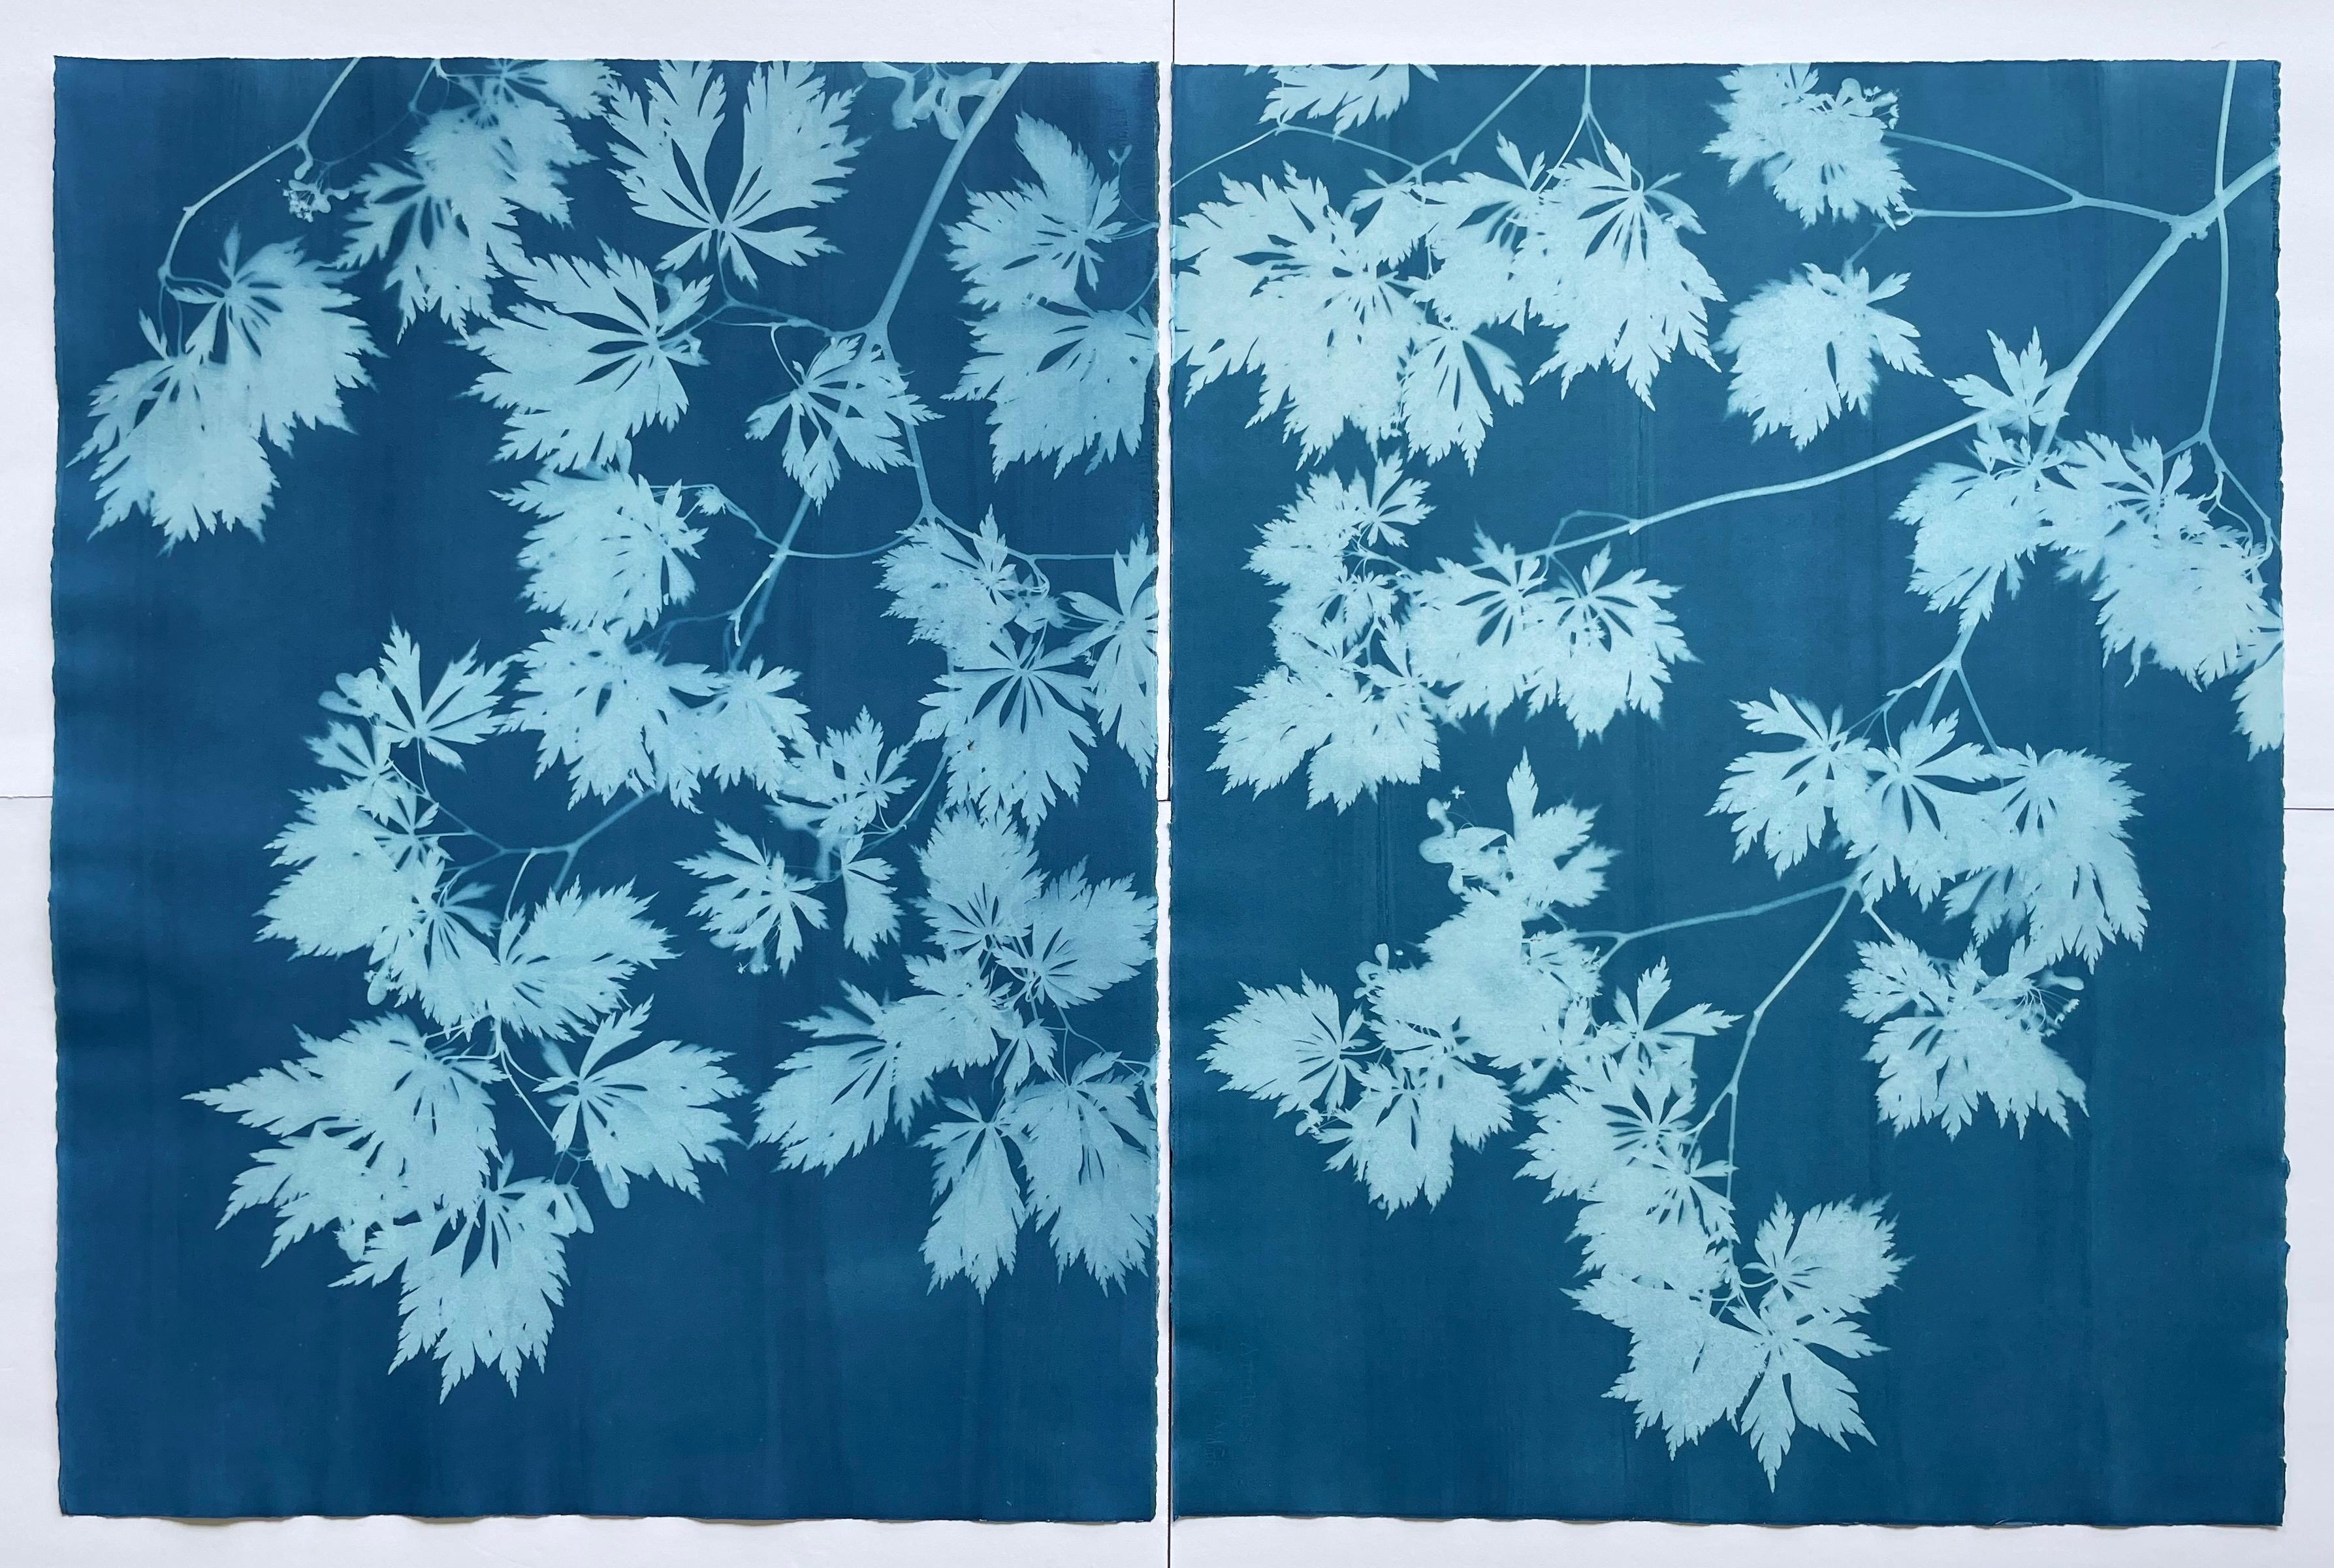 These are two unframed botanical monotypes. This species of tree is a Dancing Peacock Full Moon Japanese Maple or in Latin, acer japonicum aconitifolium. The actual Japanese name is Mai Kujaku. Cyanotypes are a kind of 19th century alternative